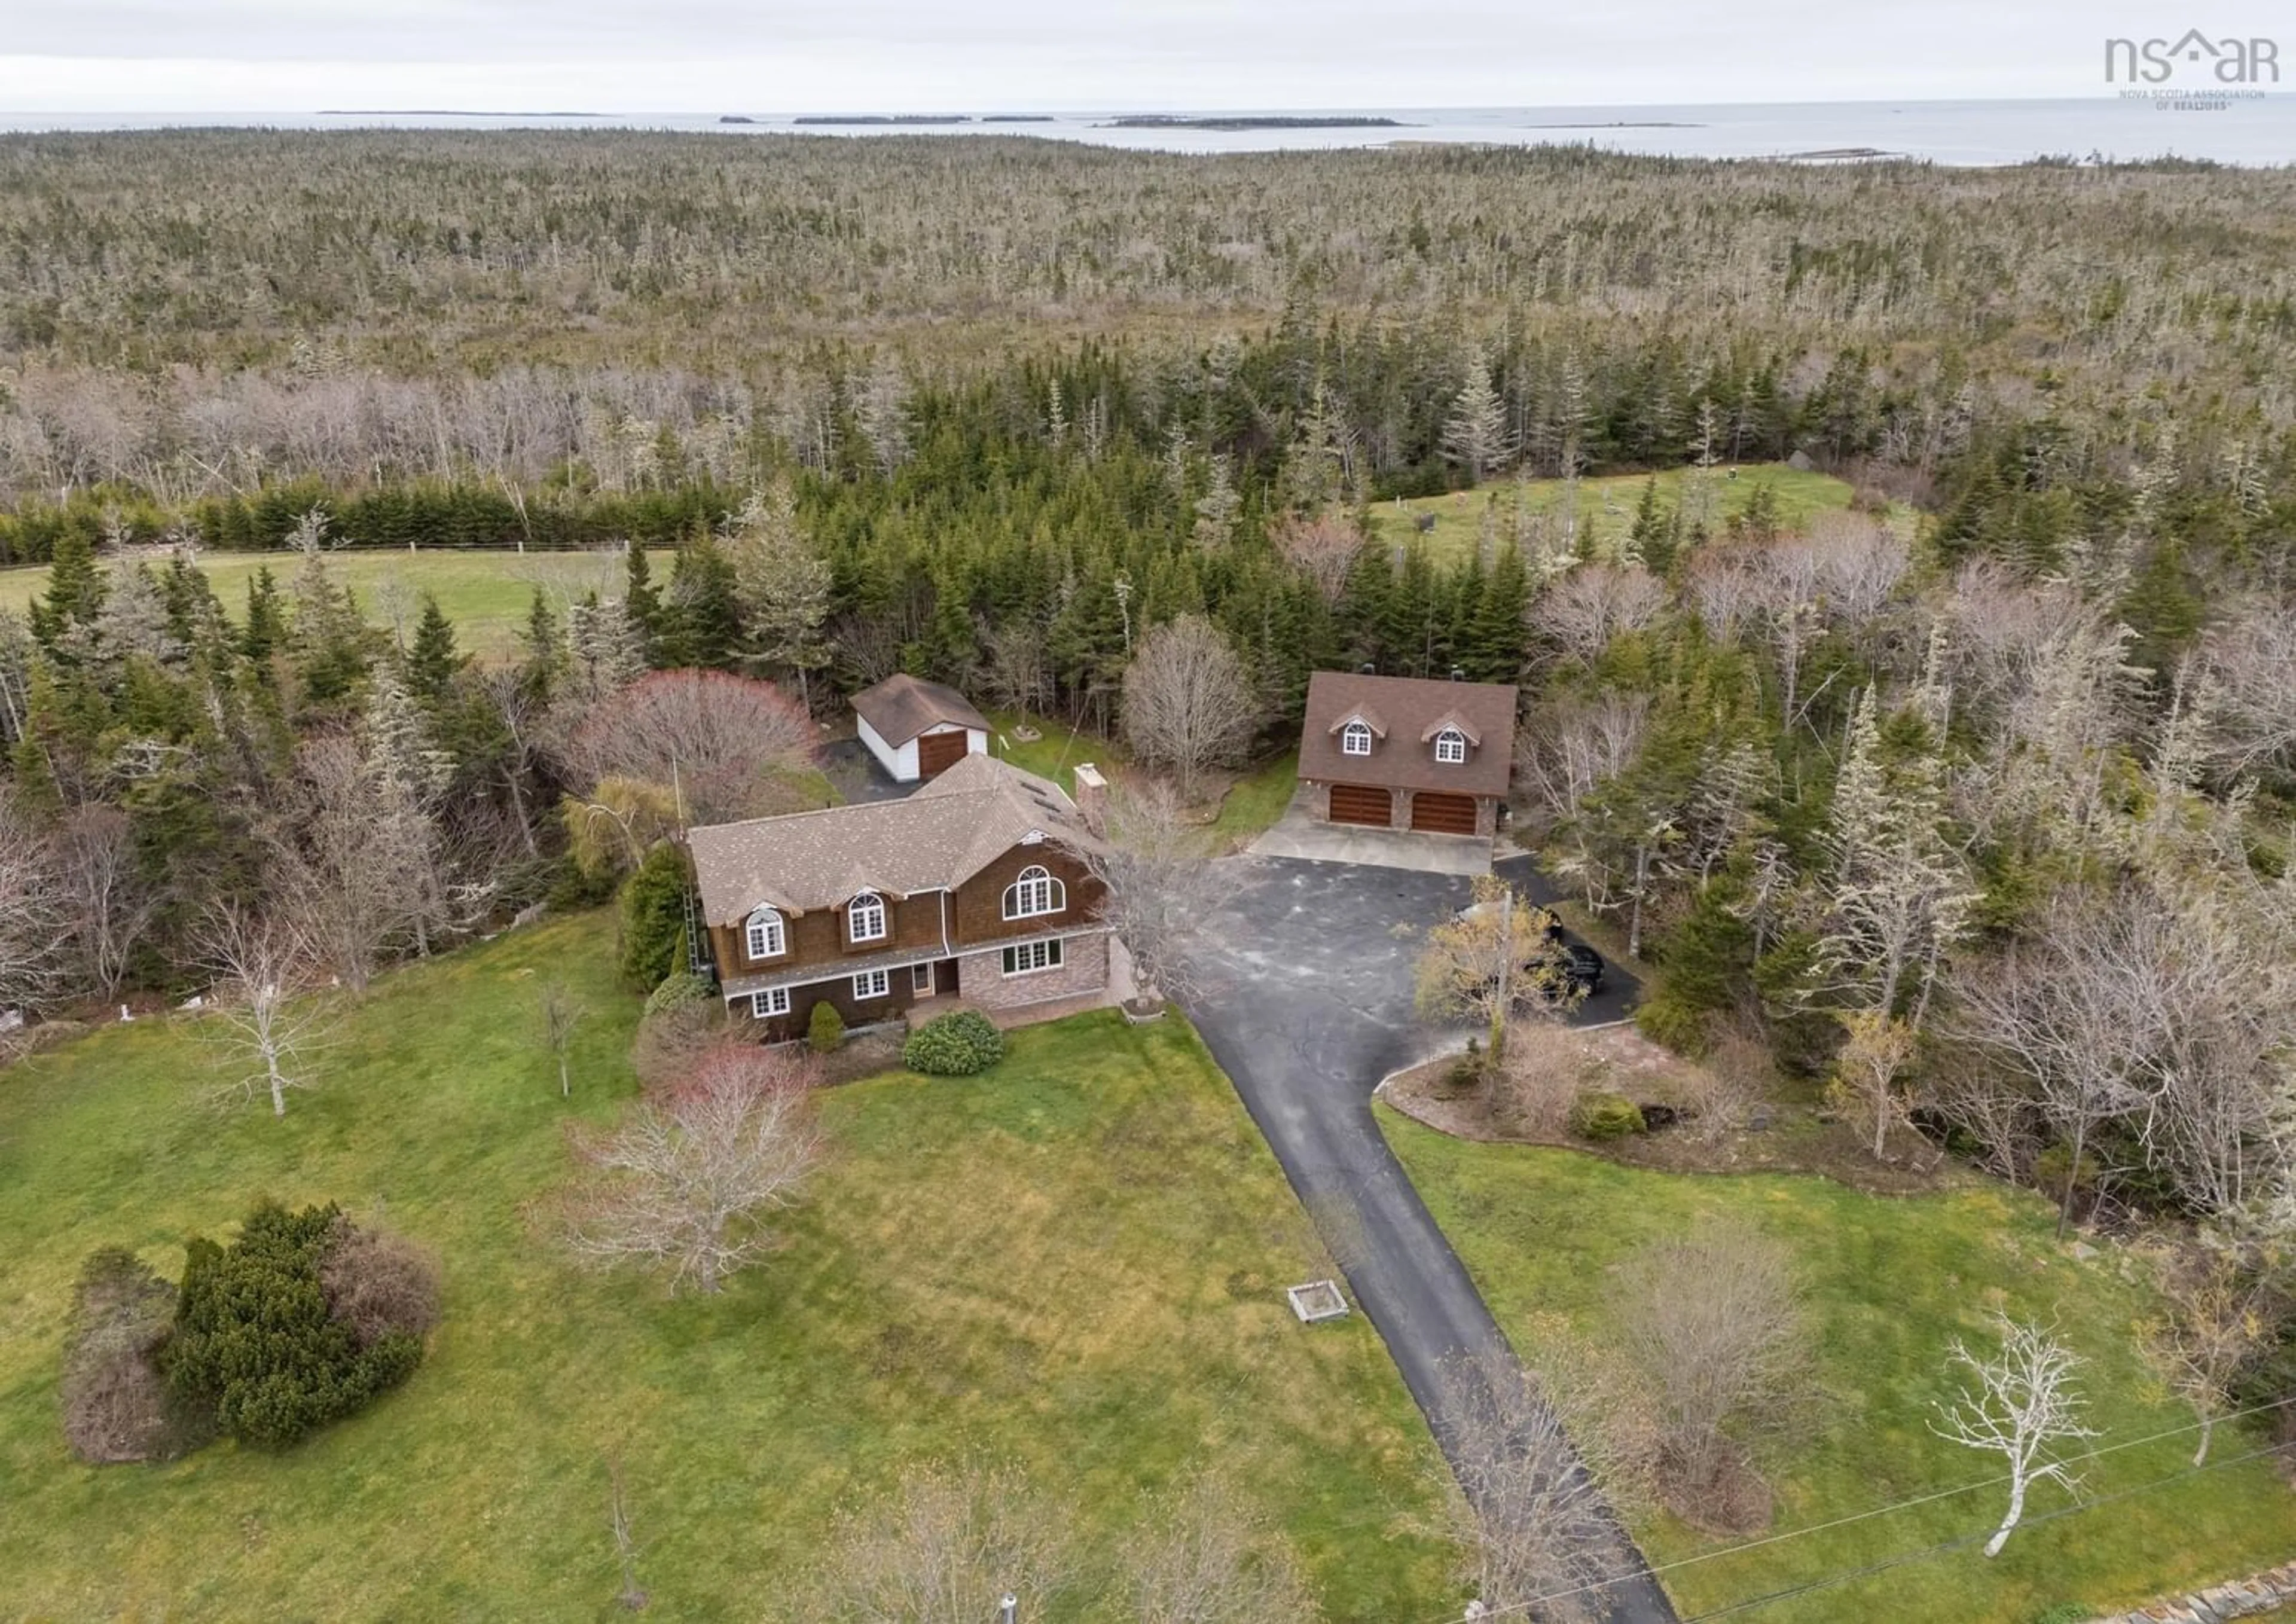 Cottage for 562 & 606 Forbes Point Rd, Forbes Point Nova Scotia B0W 2A0